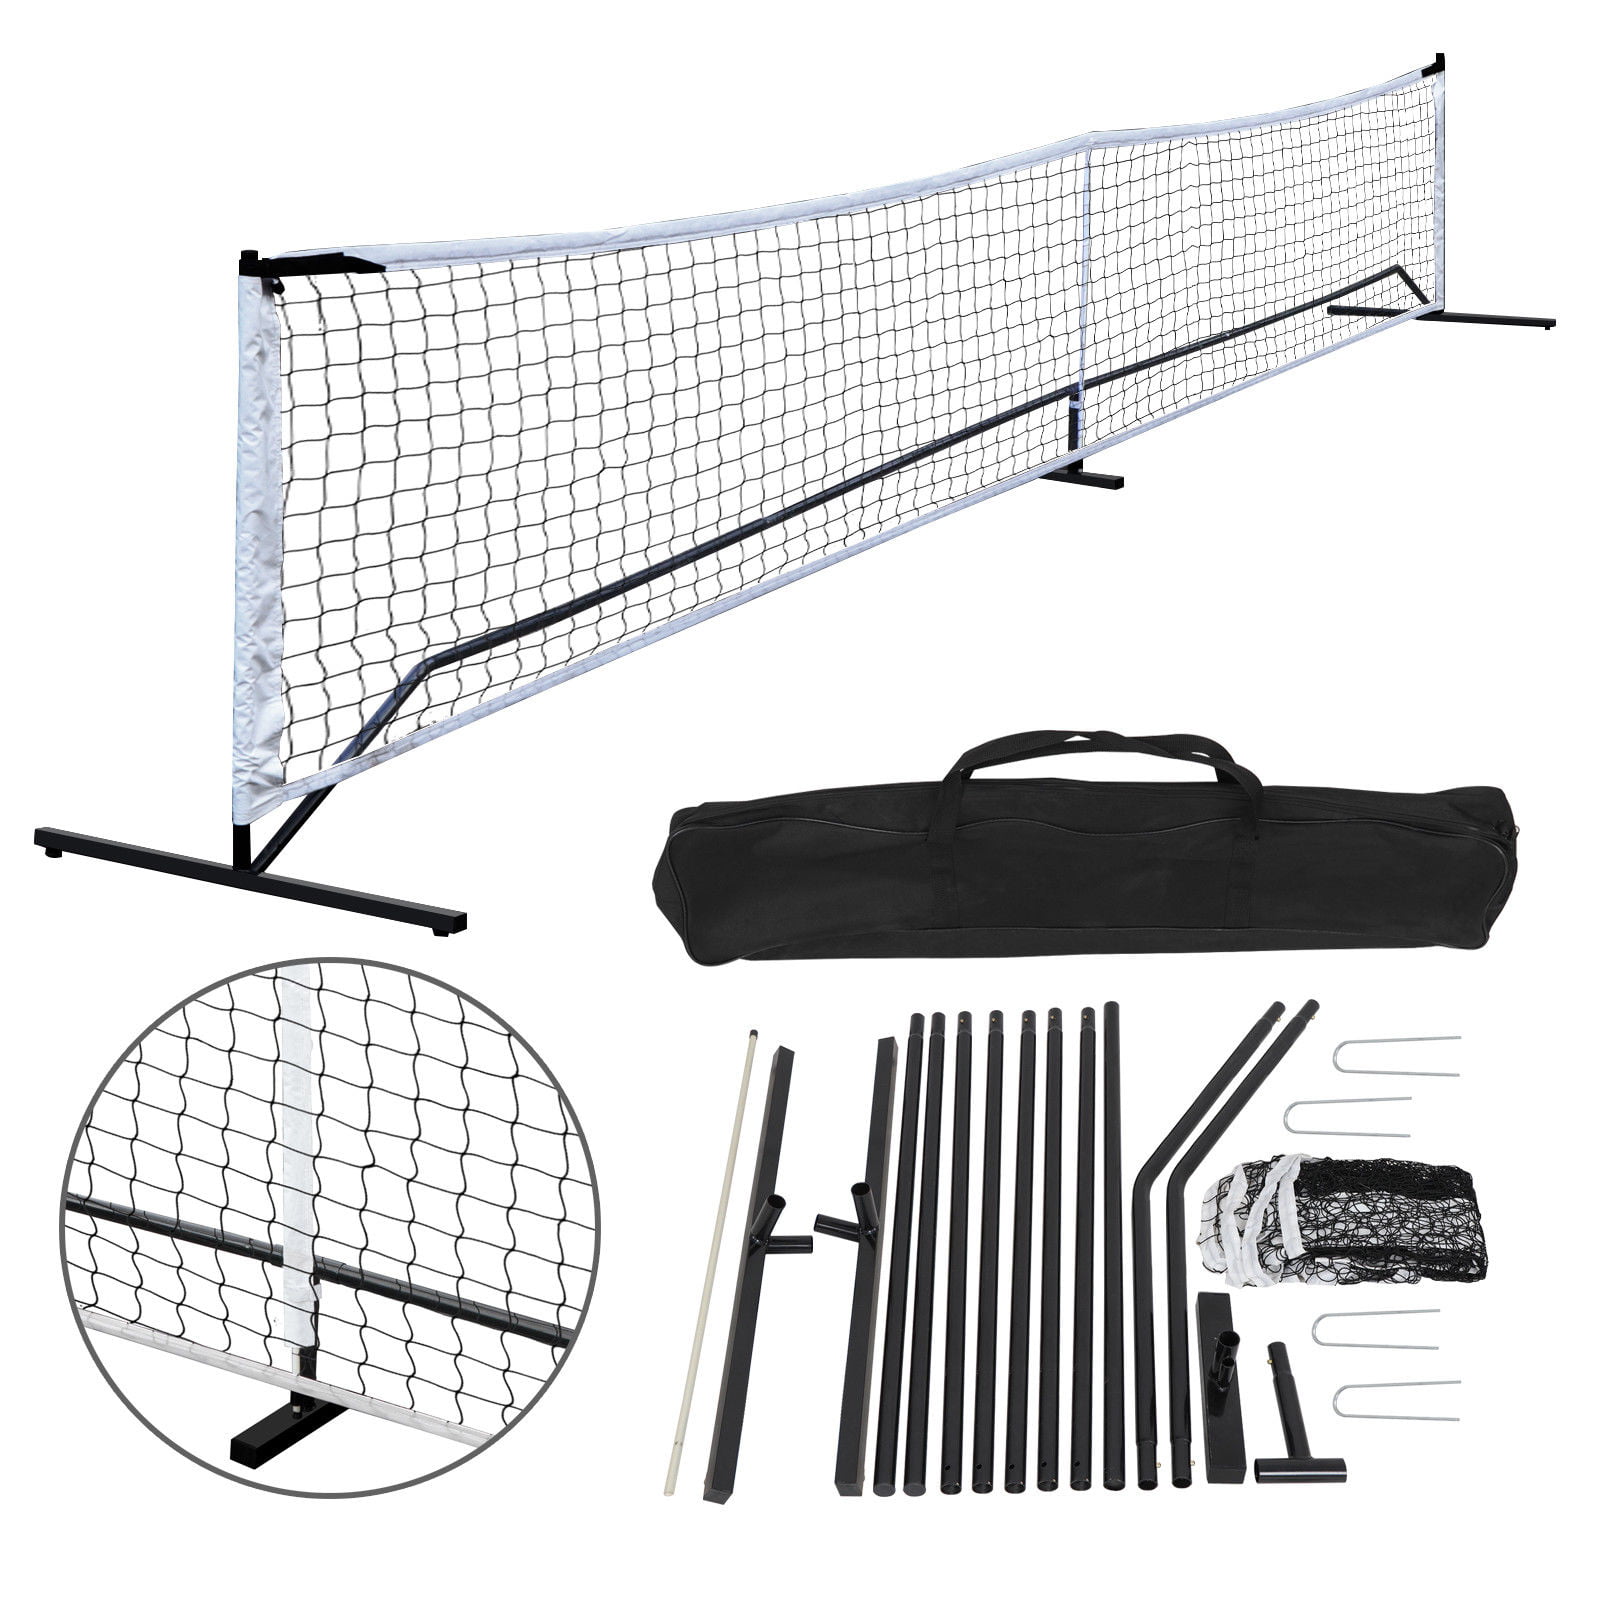 Portable Pickleball Game Tennis Net Powder Coated Frame Yard w/ Carry Bag&Stakes 